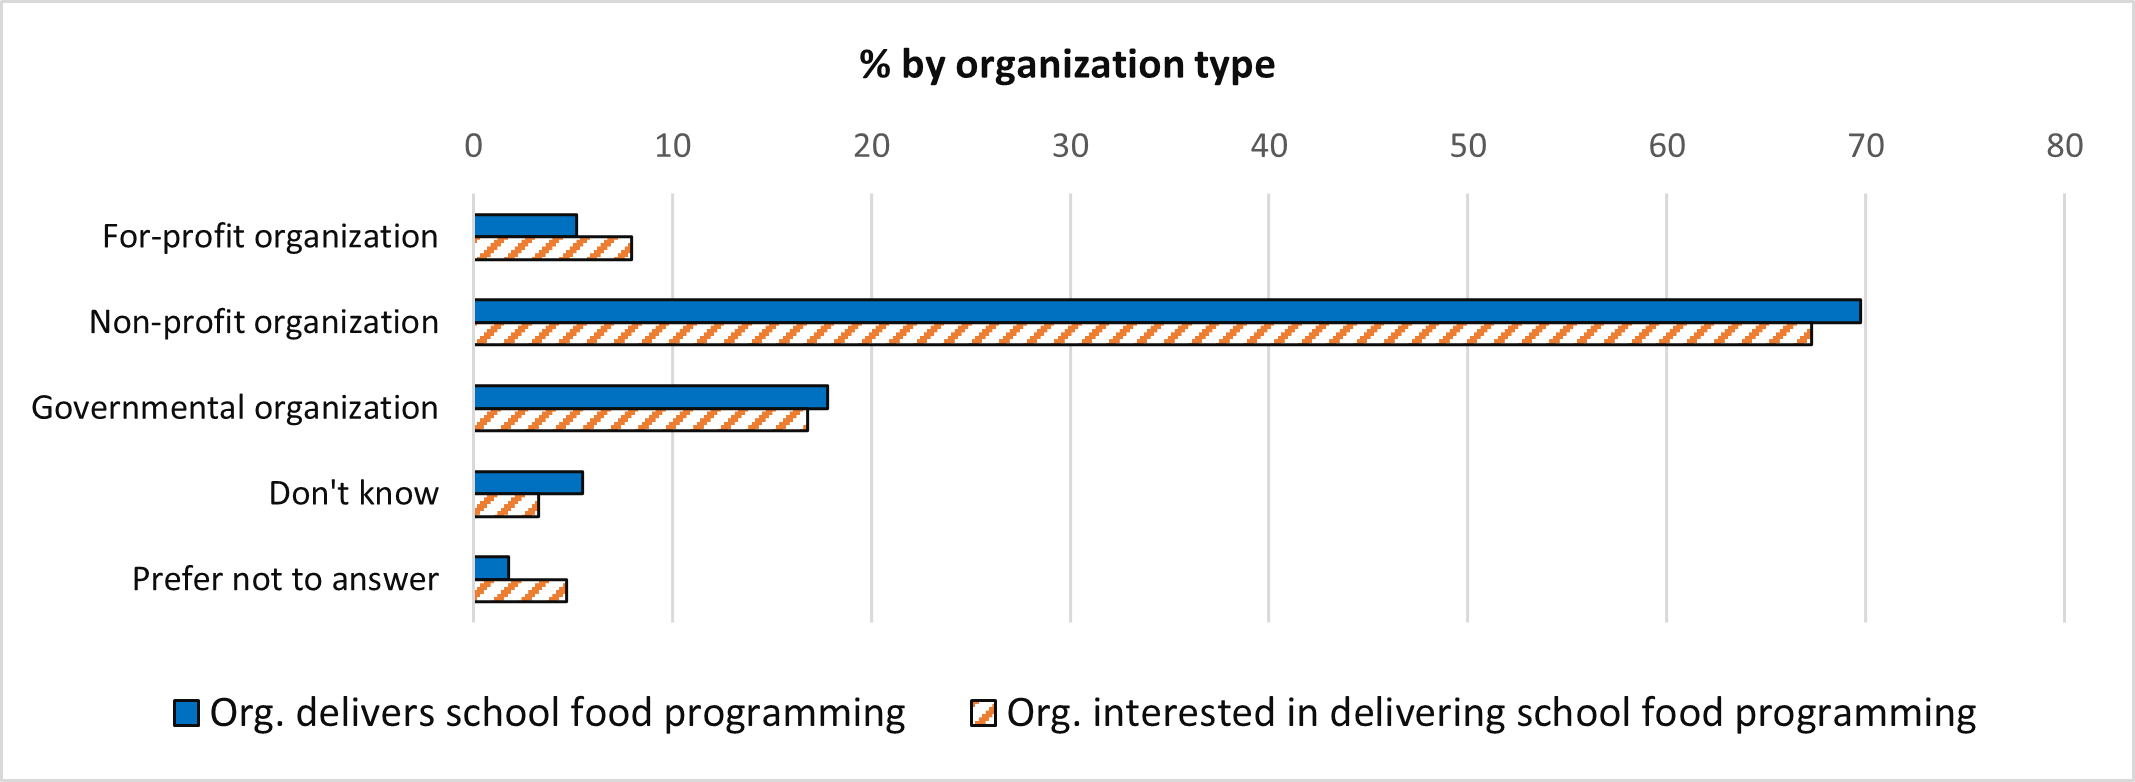 A bar chart of the percent of organizational respondents by organization type. Text version below.